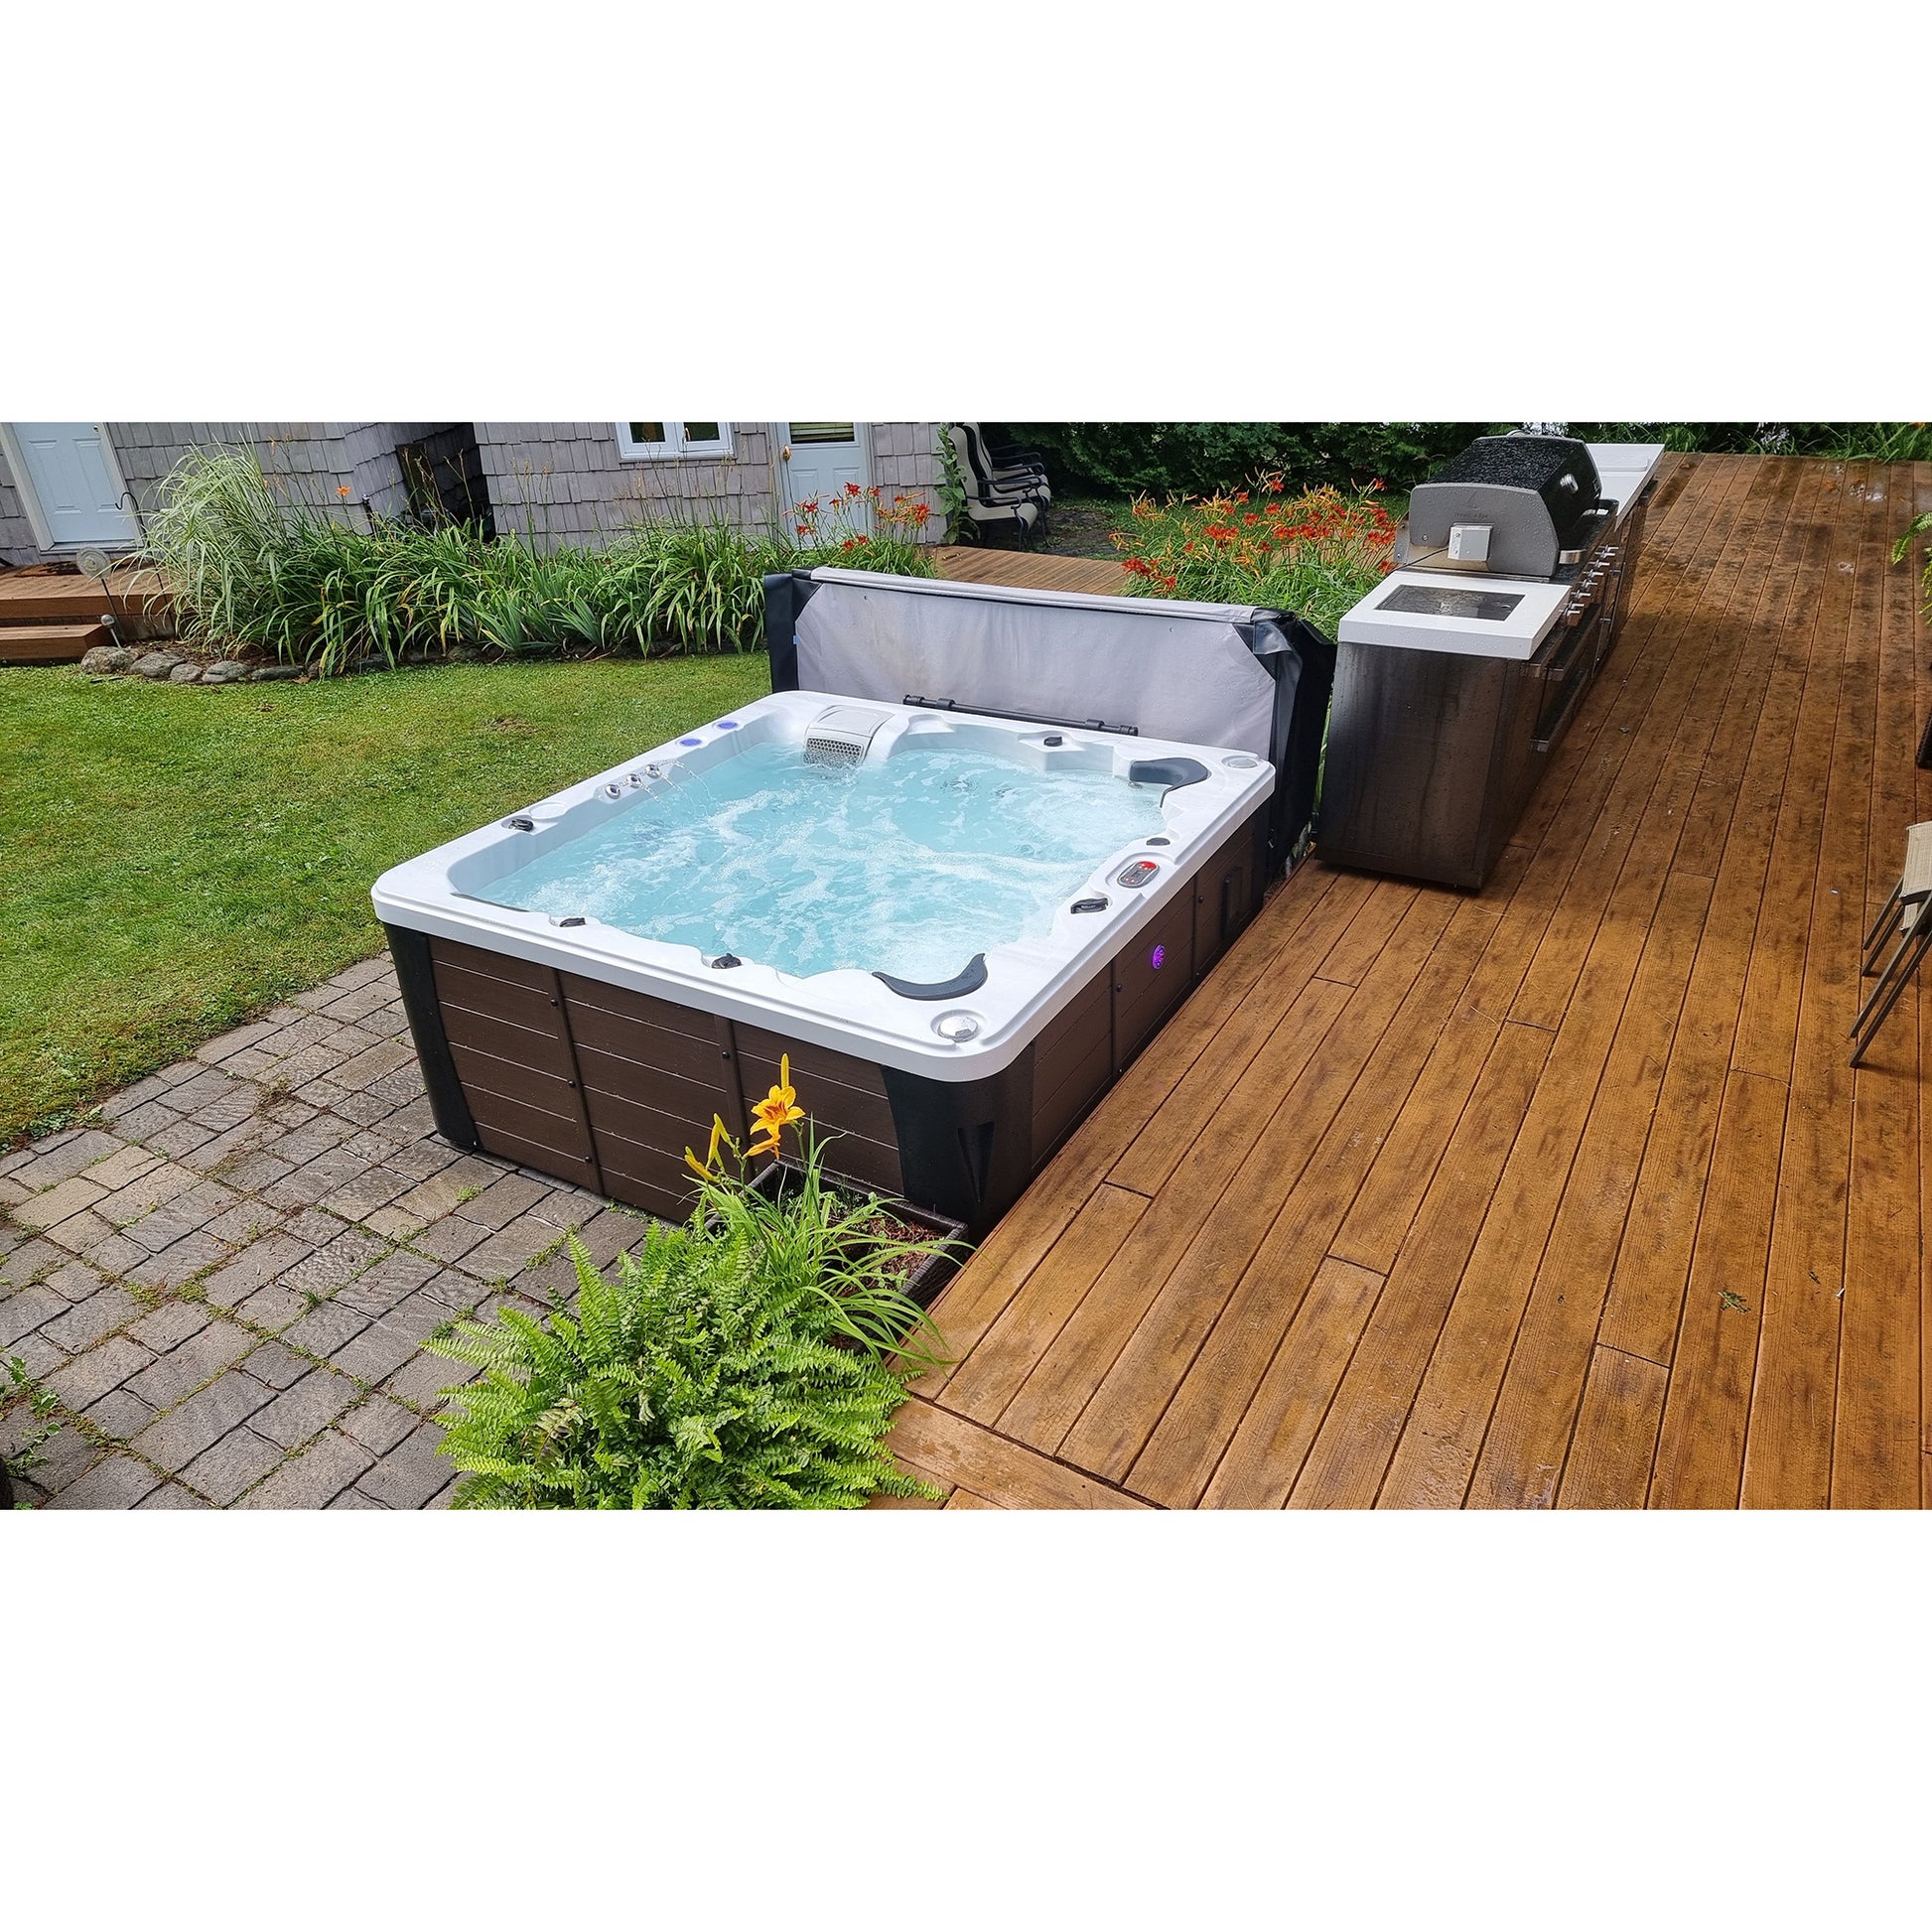 Canadian Spa Company_KH-10130_Erie_Square_6-Person_46 -Jet Hot Tub_Blackout Insulation_UV Light Water Care_Lounger